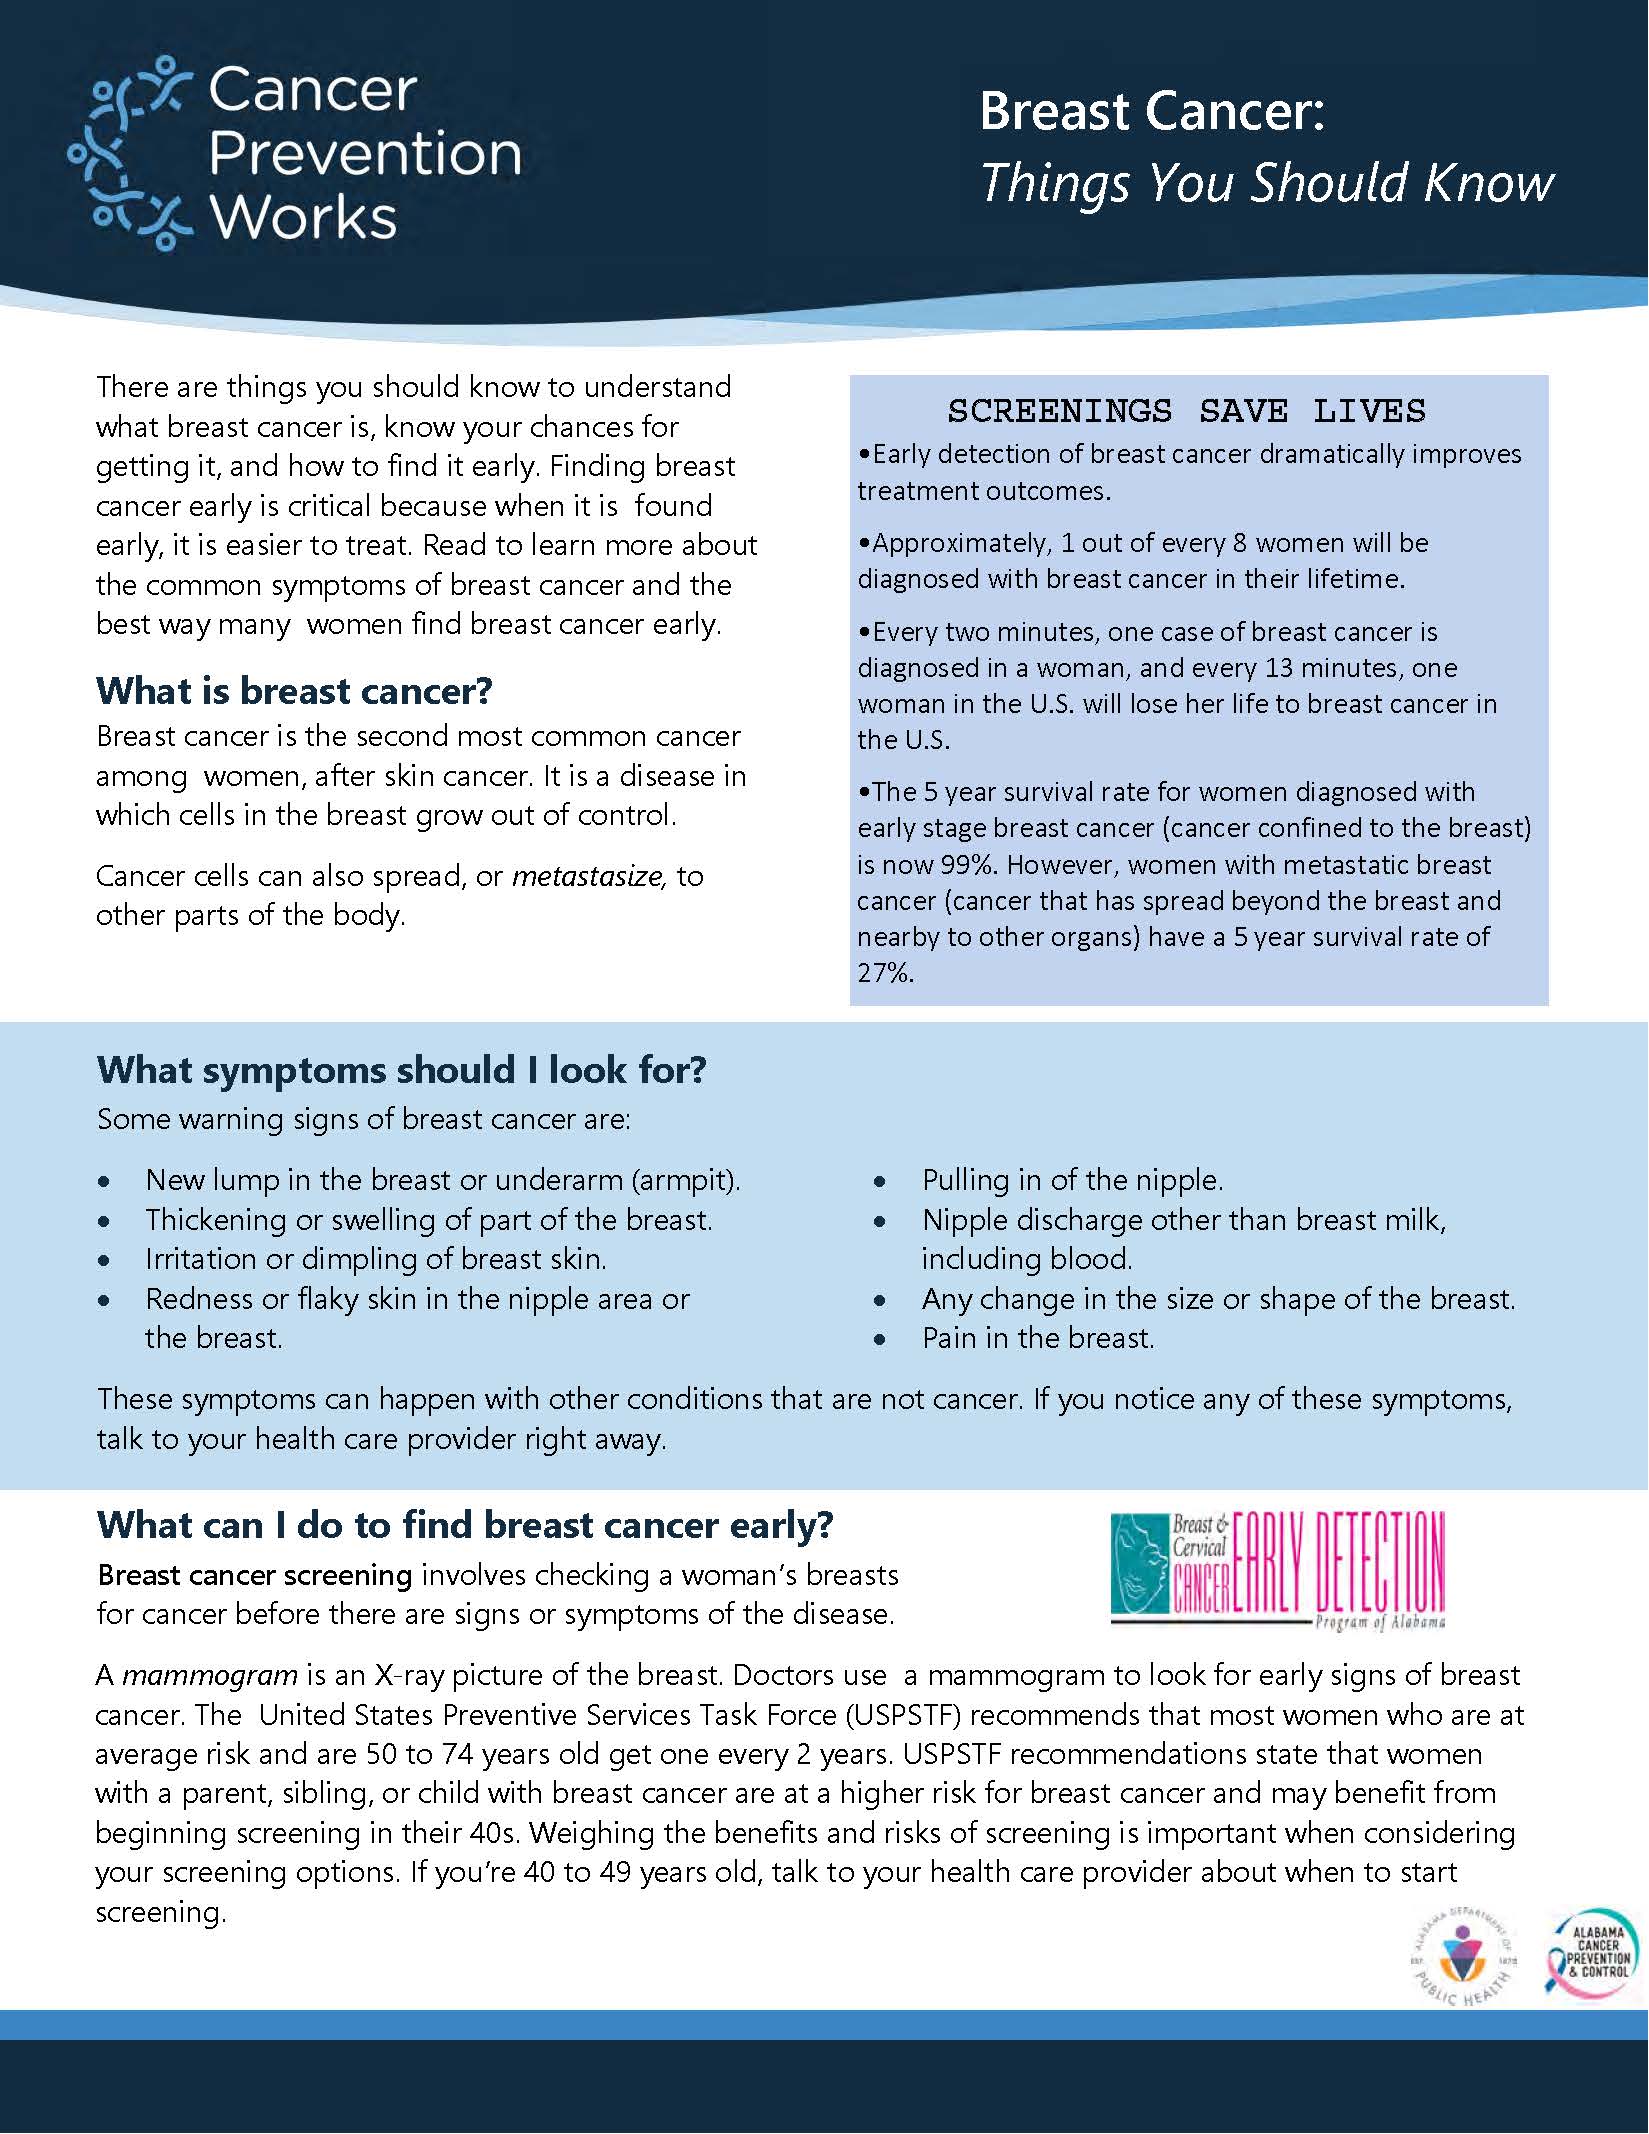 Breast Cancer: Things You Should Know